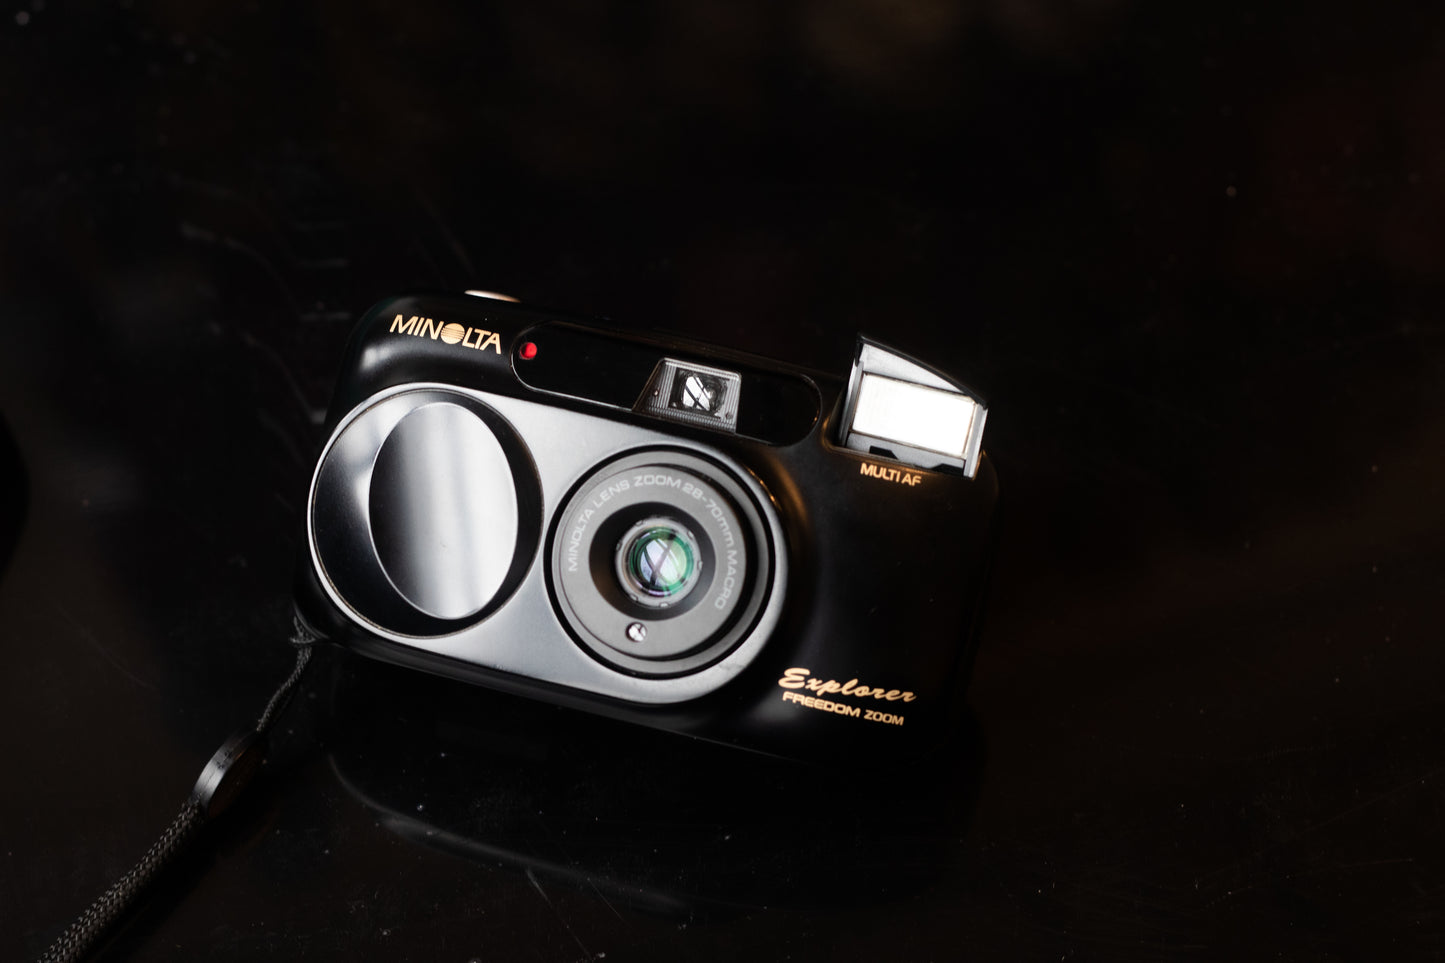 Minolta Explorer Freedom Zoom | Near Mint Condition | 35mm Point and Shoot camera